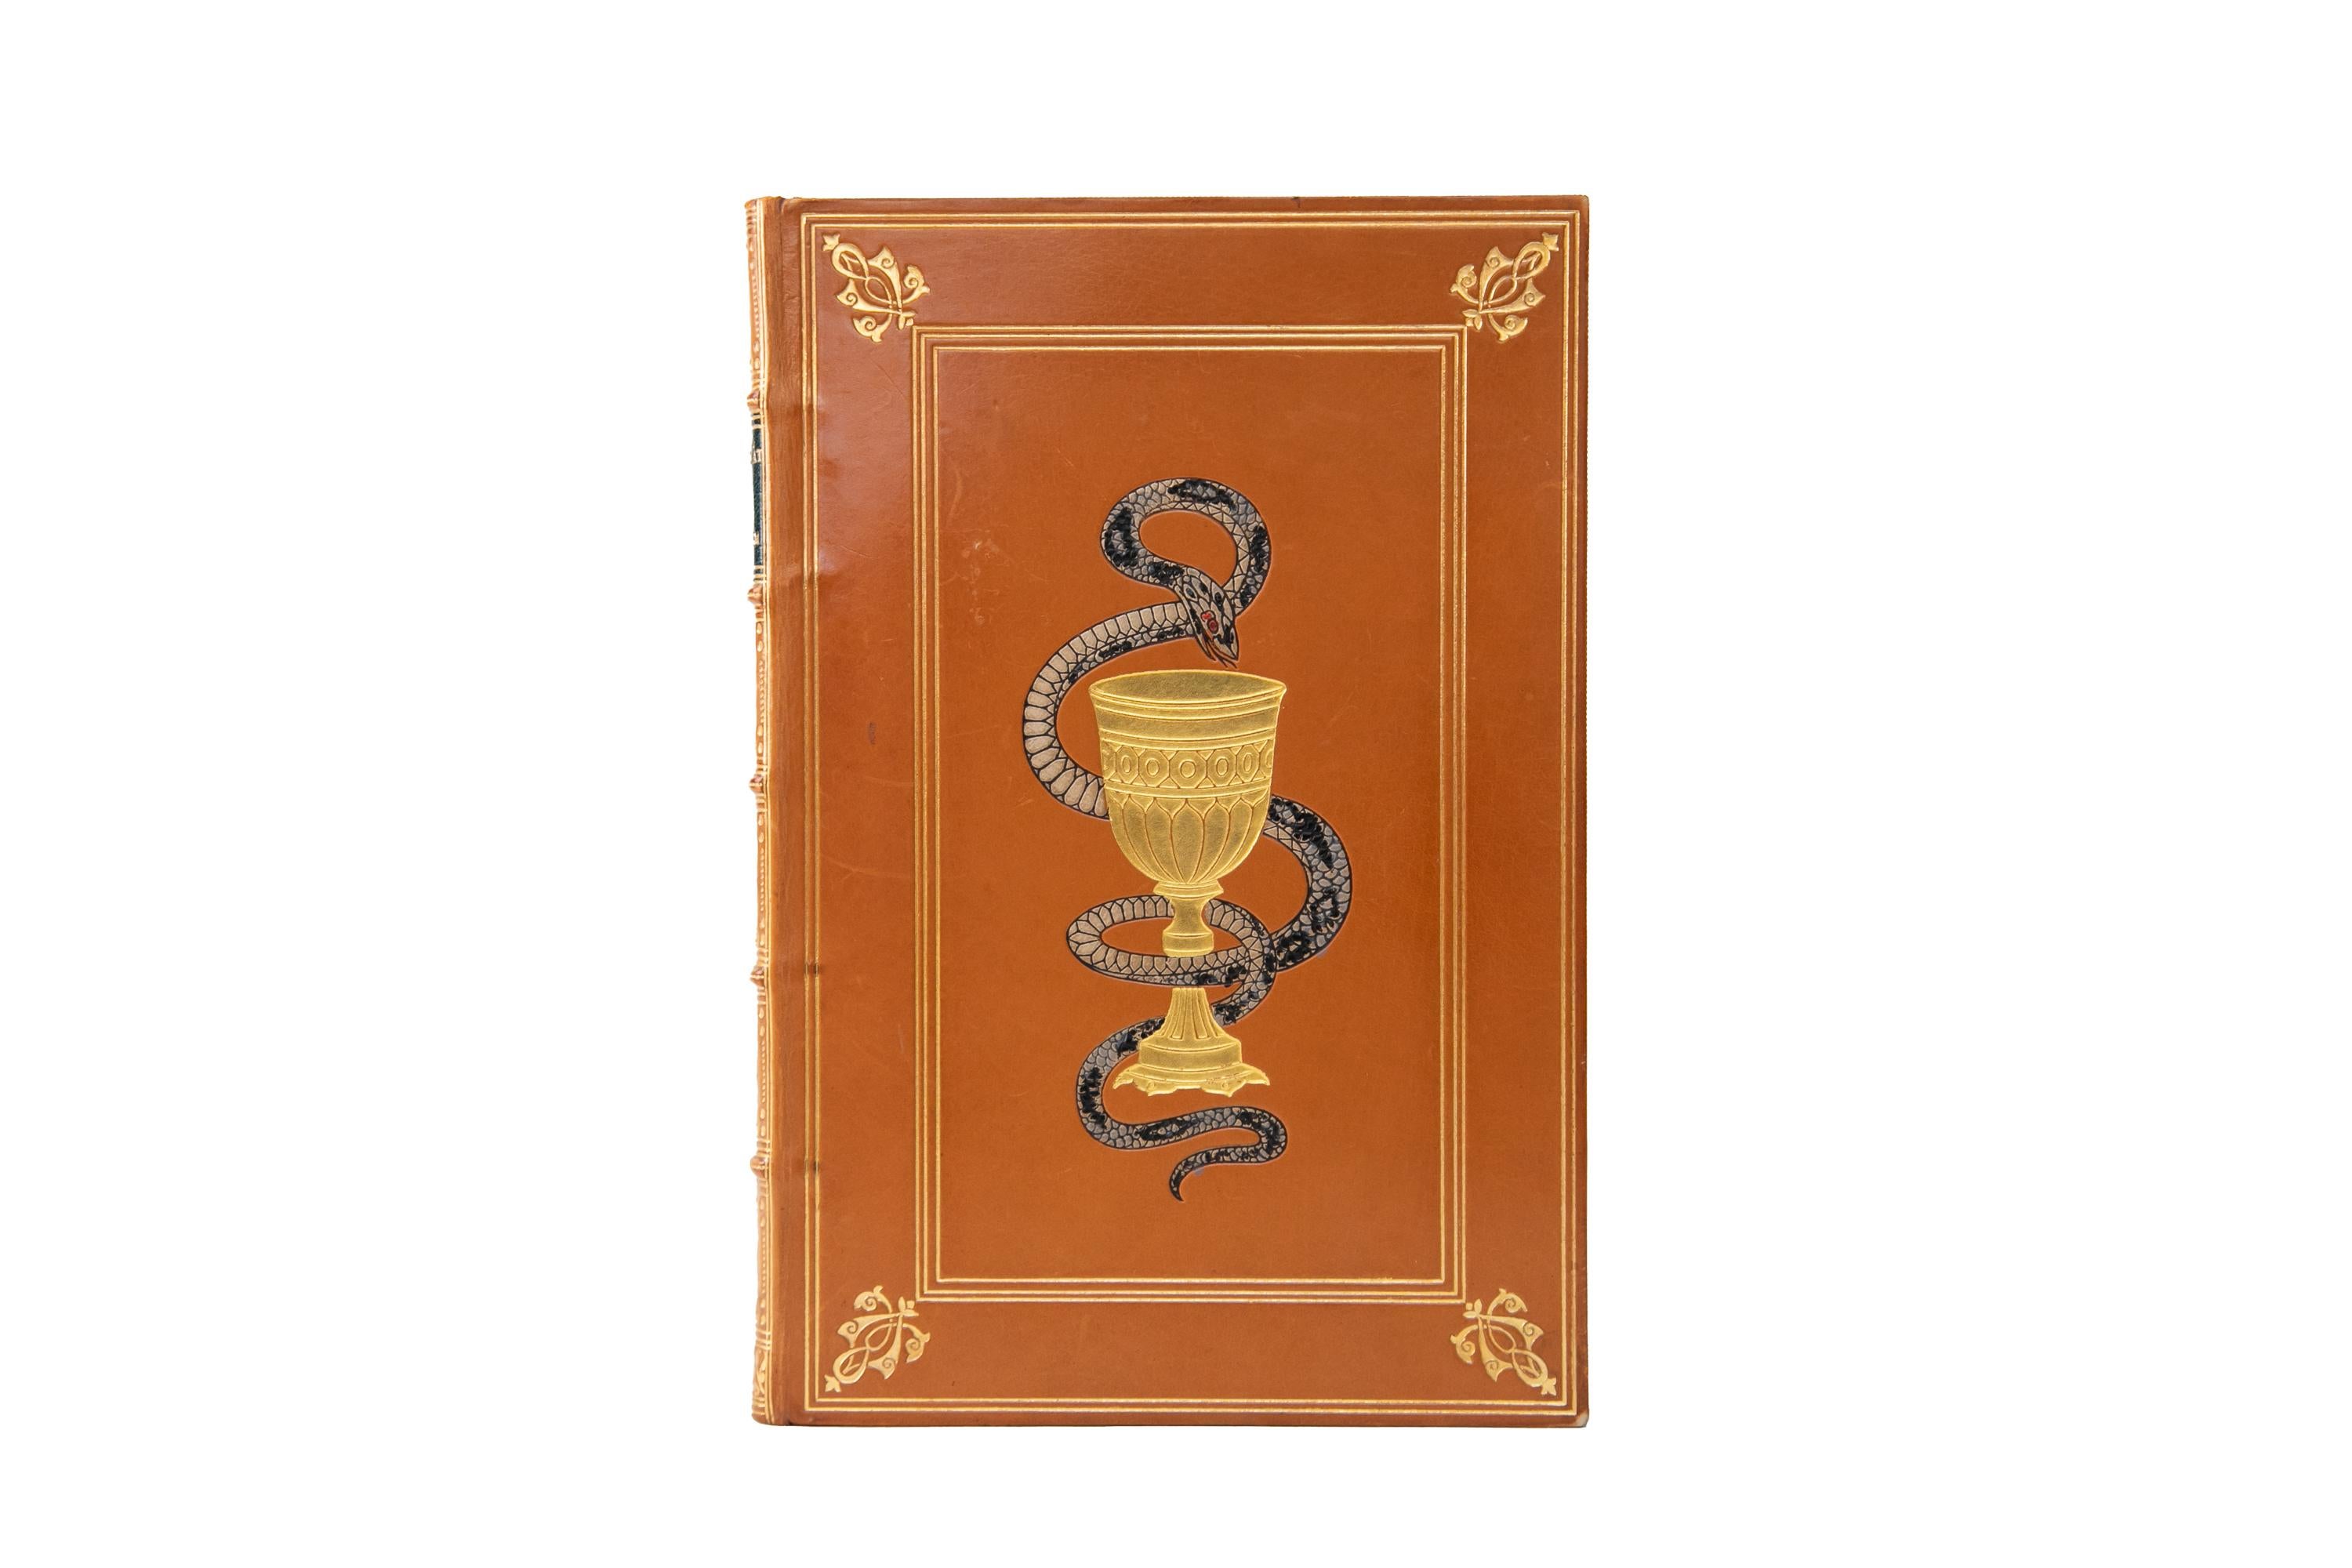 1 Volume. Edward Fitzgerald, Rubáiyát of Omar Khayyám. Bound by Riviere & Son in full orange calf with the cover displaying a multi-color inlay snake around a gilt-tooled challis and gilt-tooled bordering details. Raised band spine with gilt-tooled